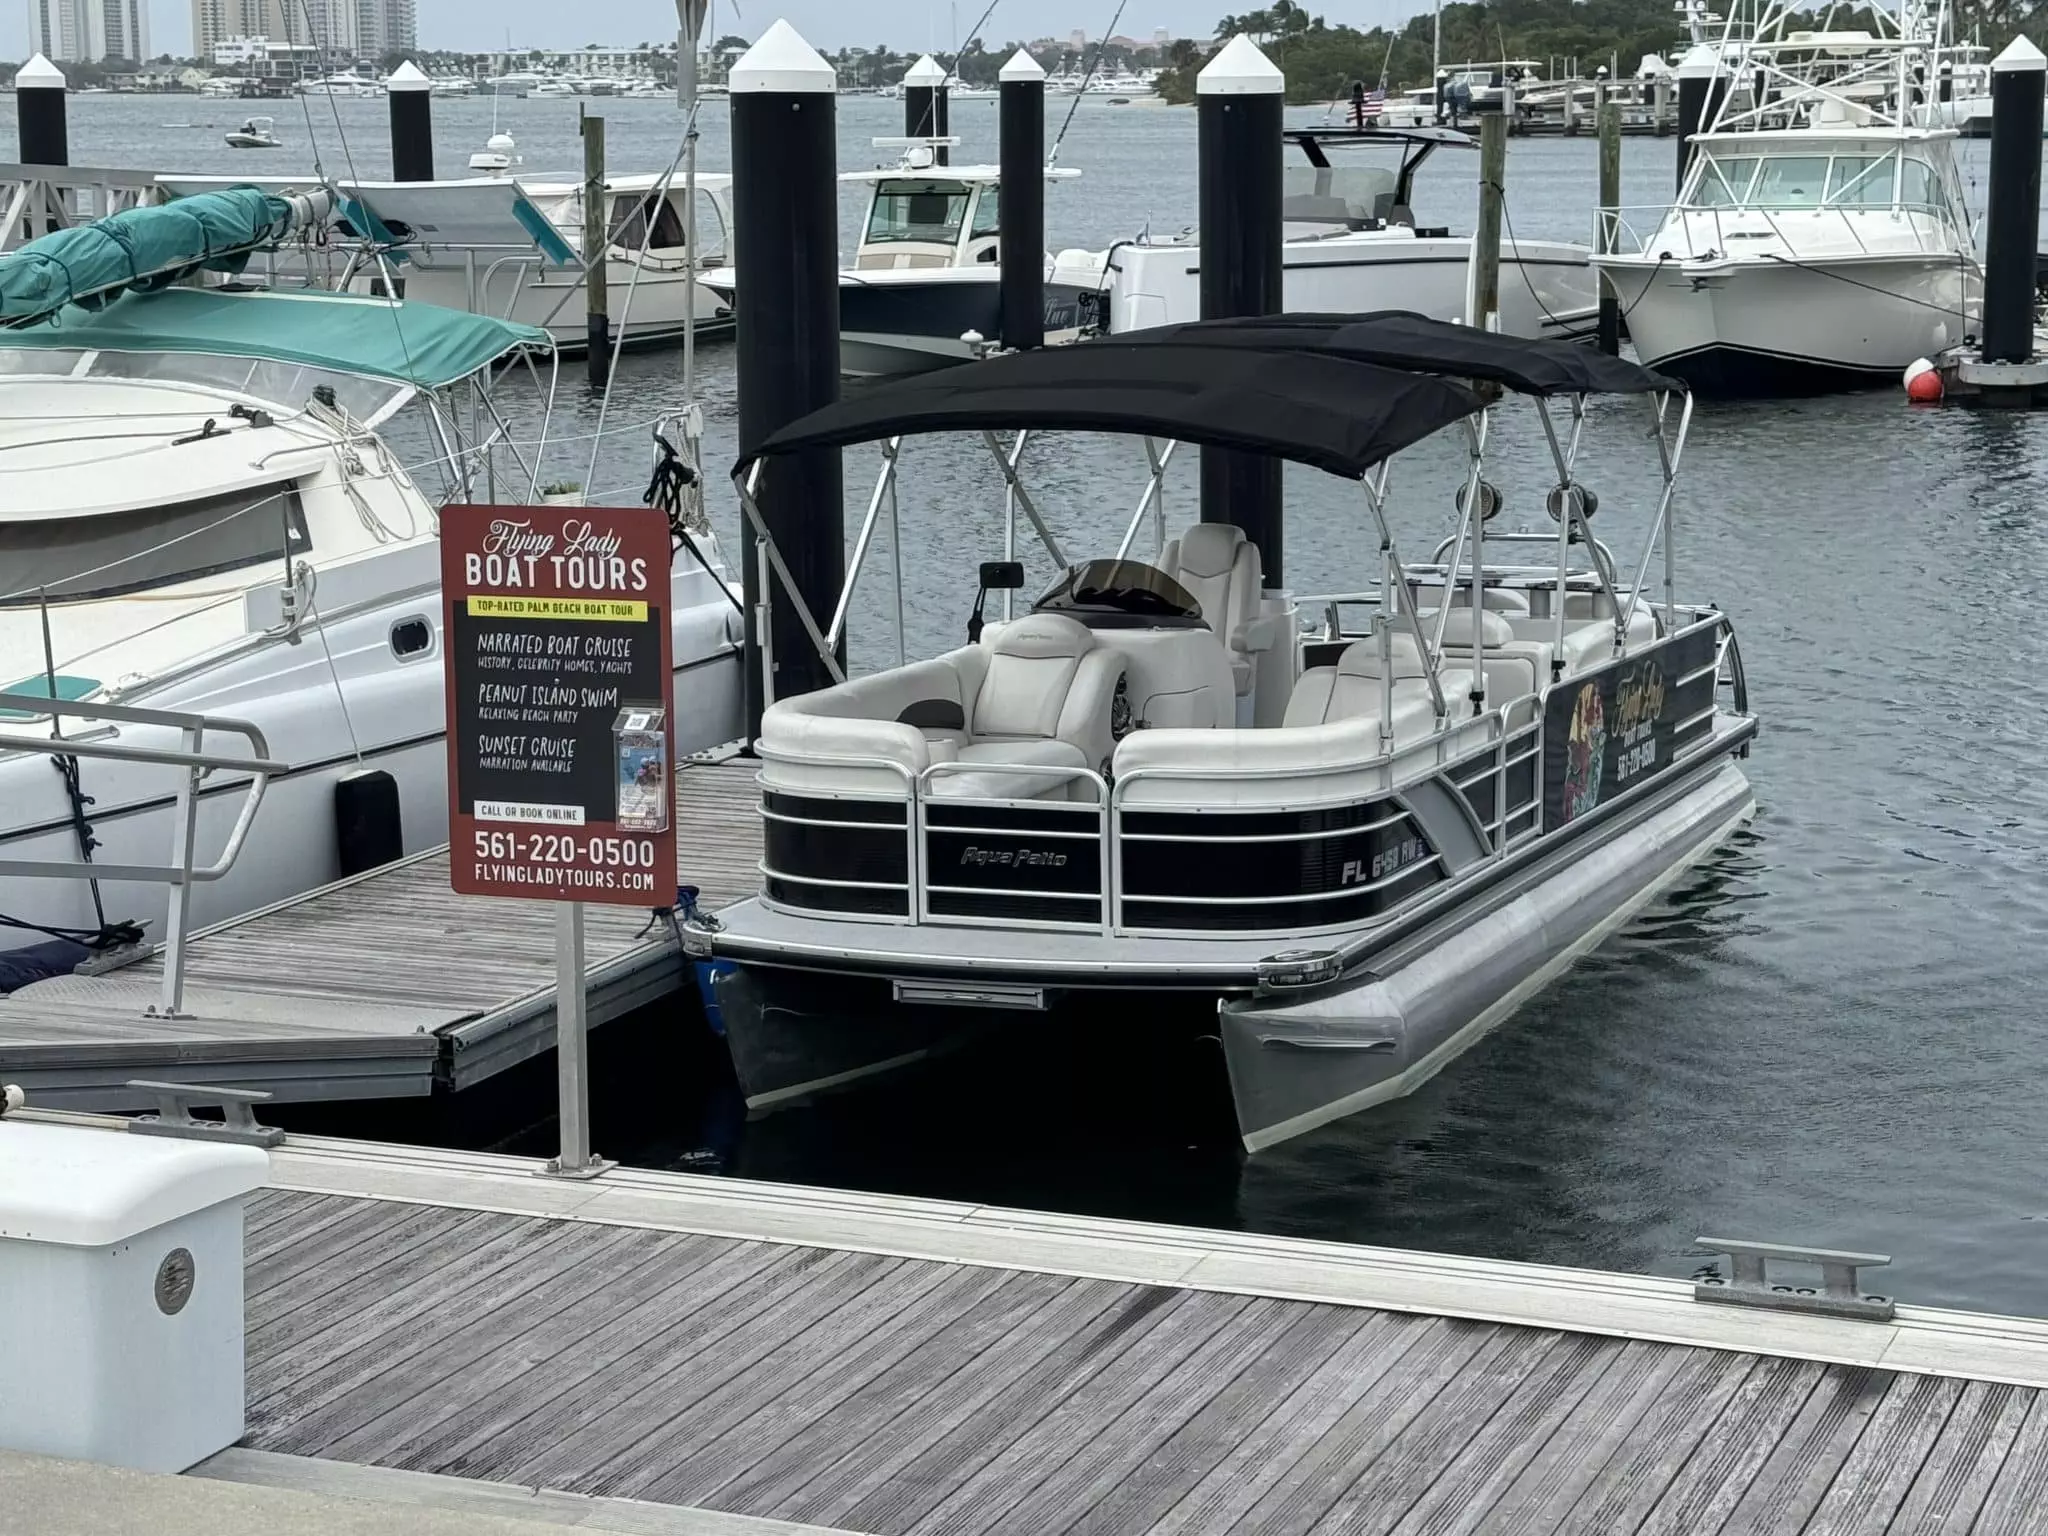 A boat docked at a dock.